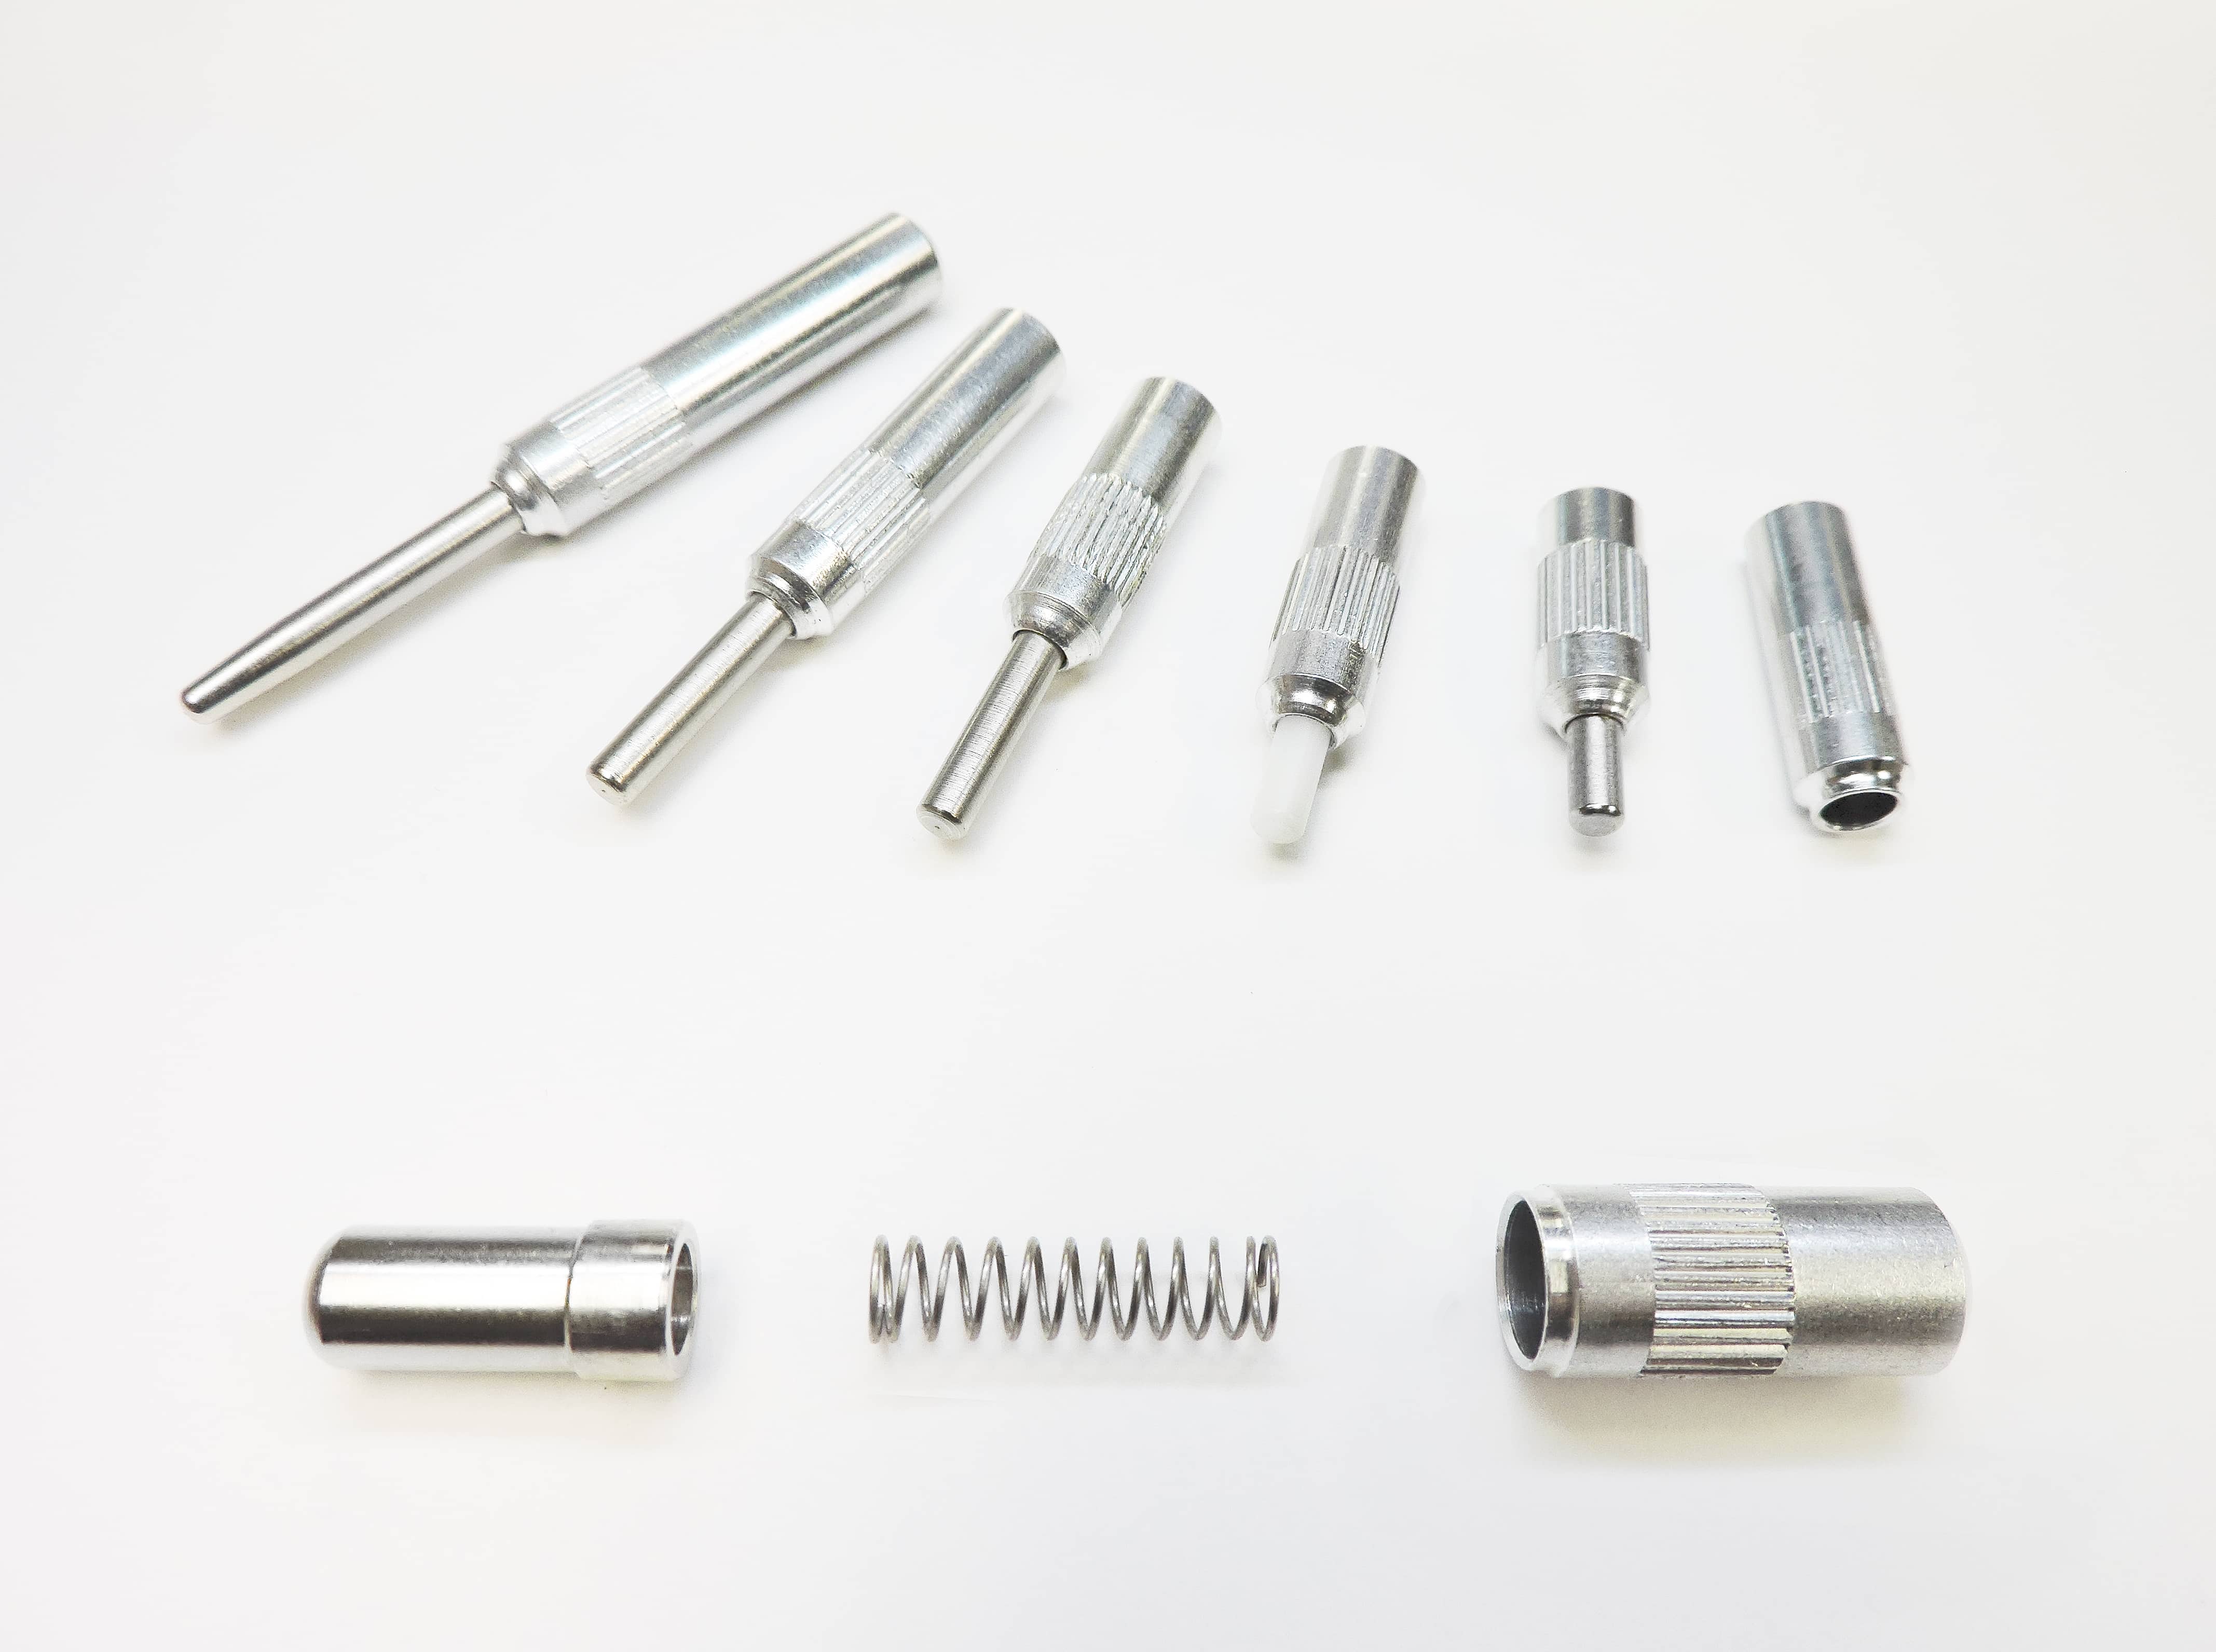 Precision CNC Swiss Machined Aluminum Retractable Pin Assembly